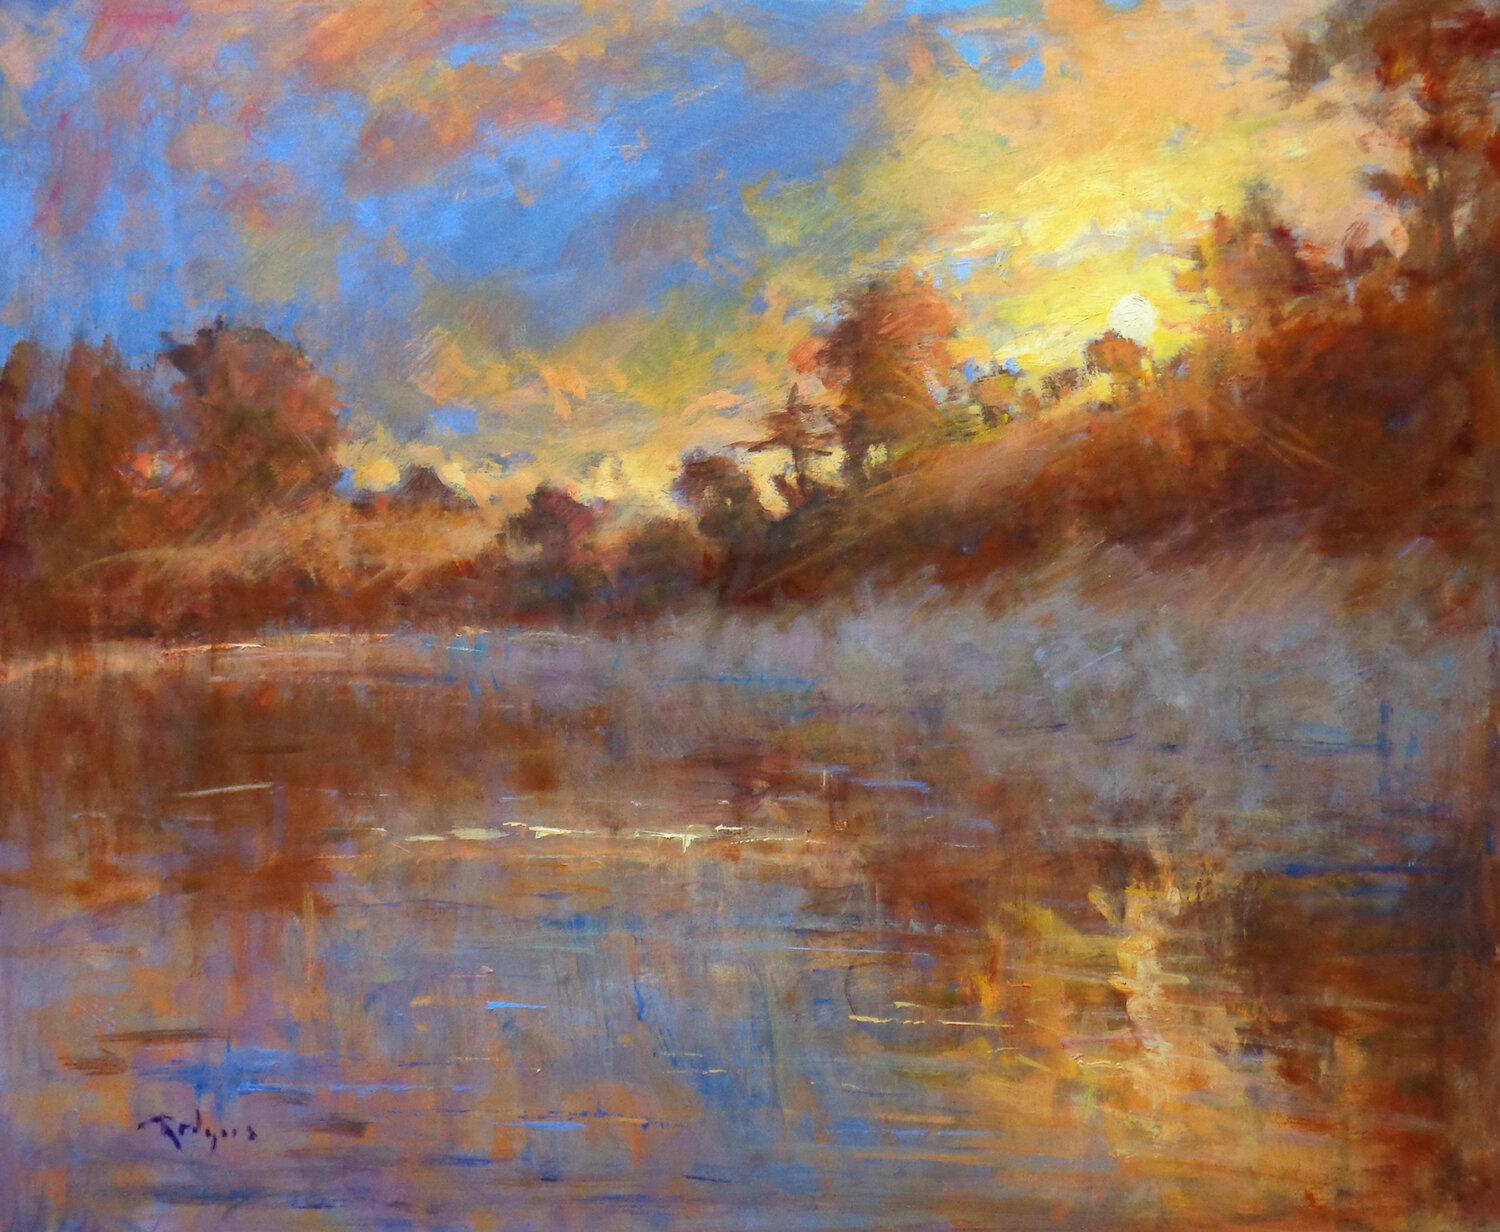 “Dramatic Sunrise” is an oil on board by Jim Rodgers.